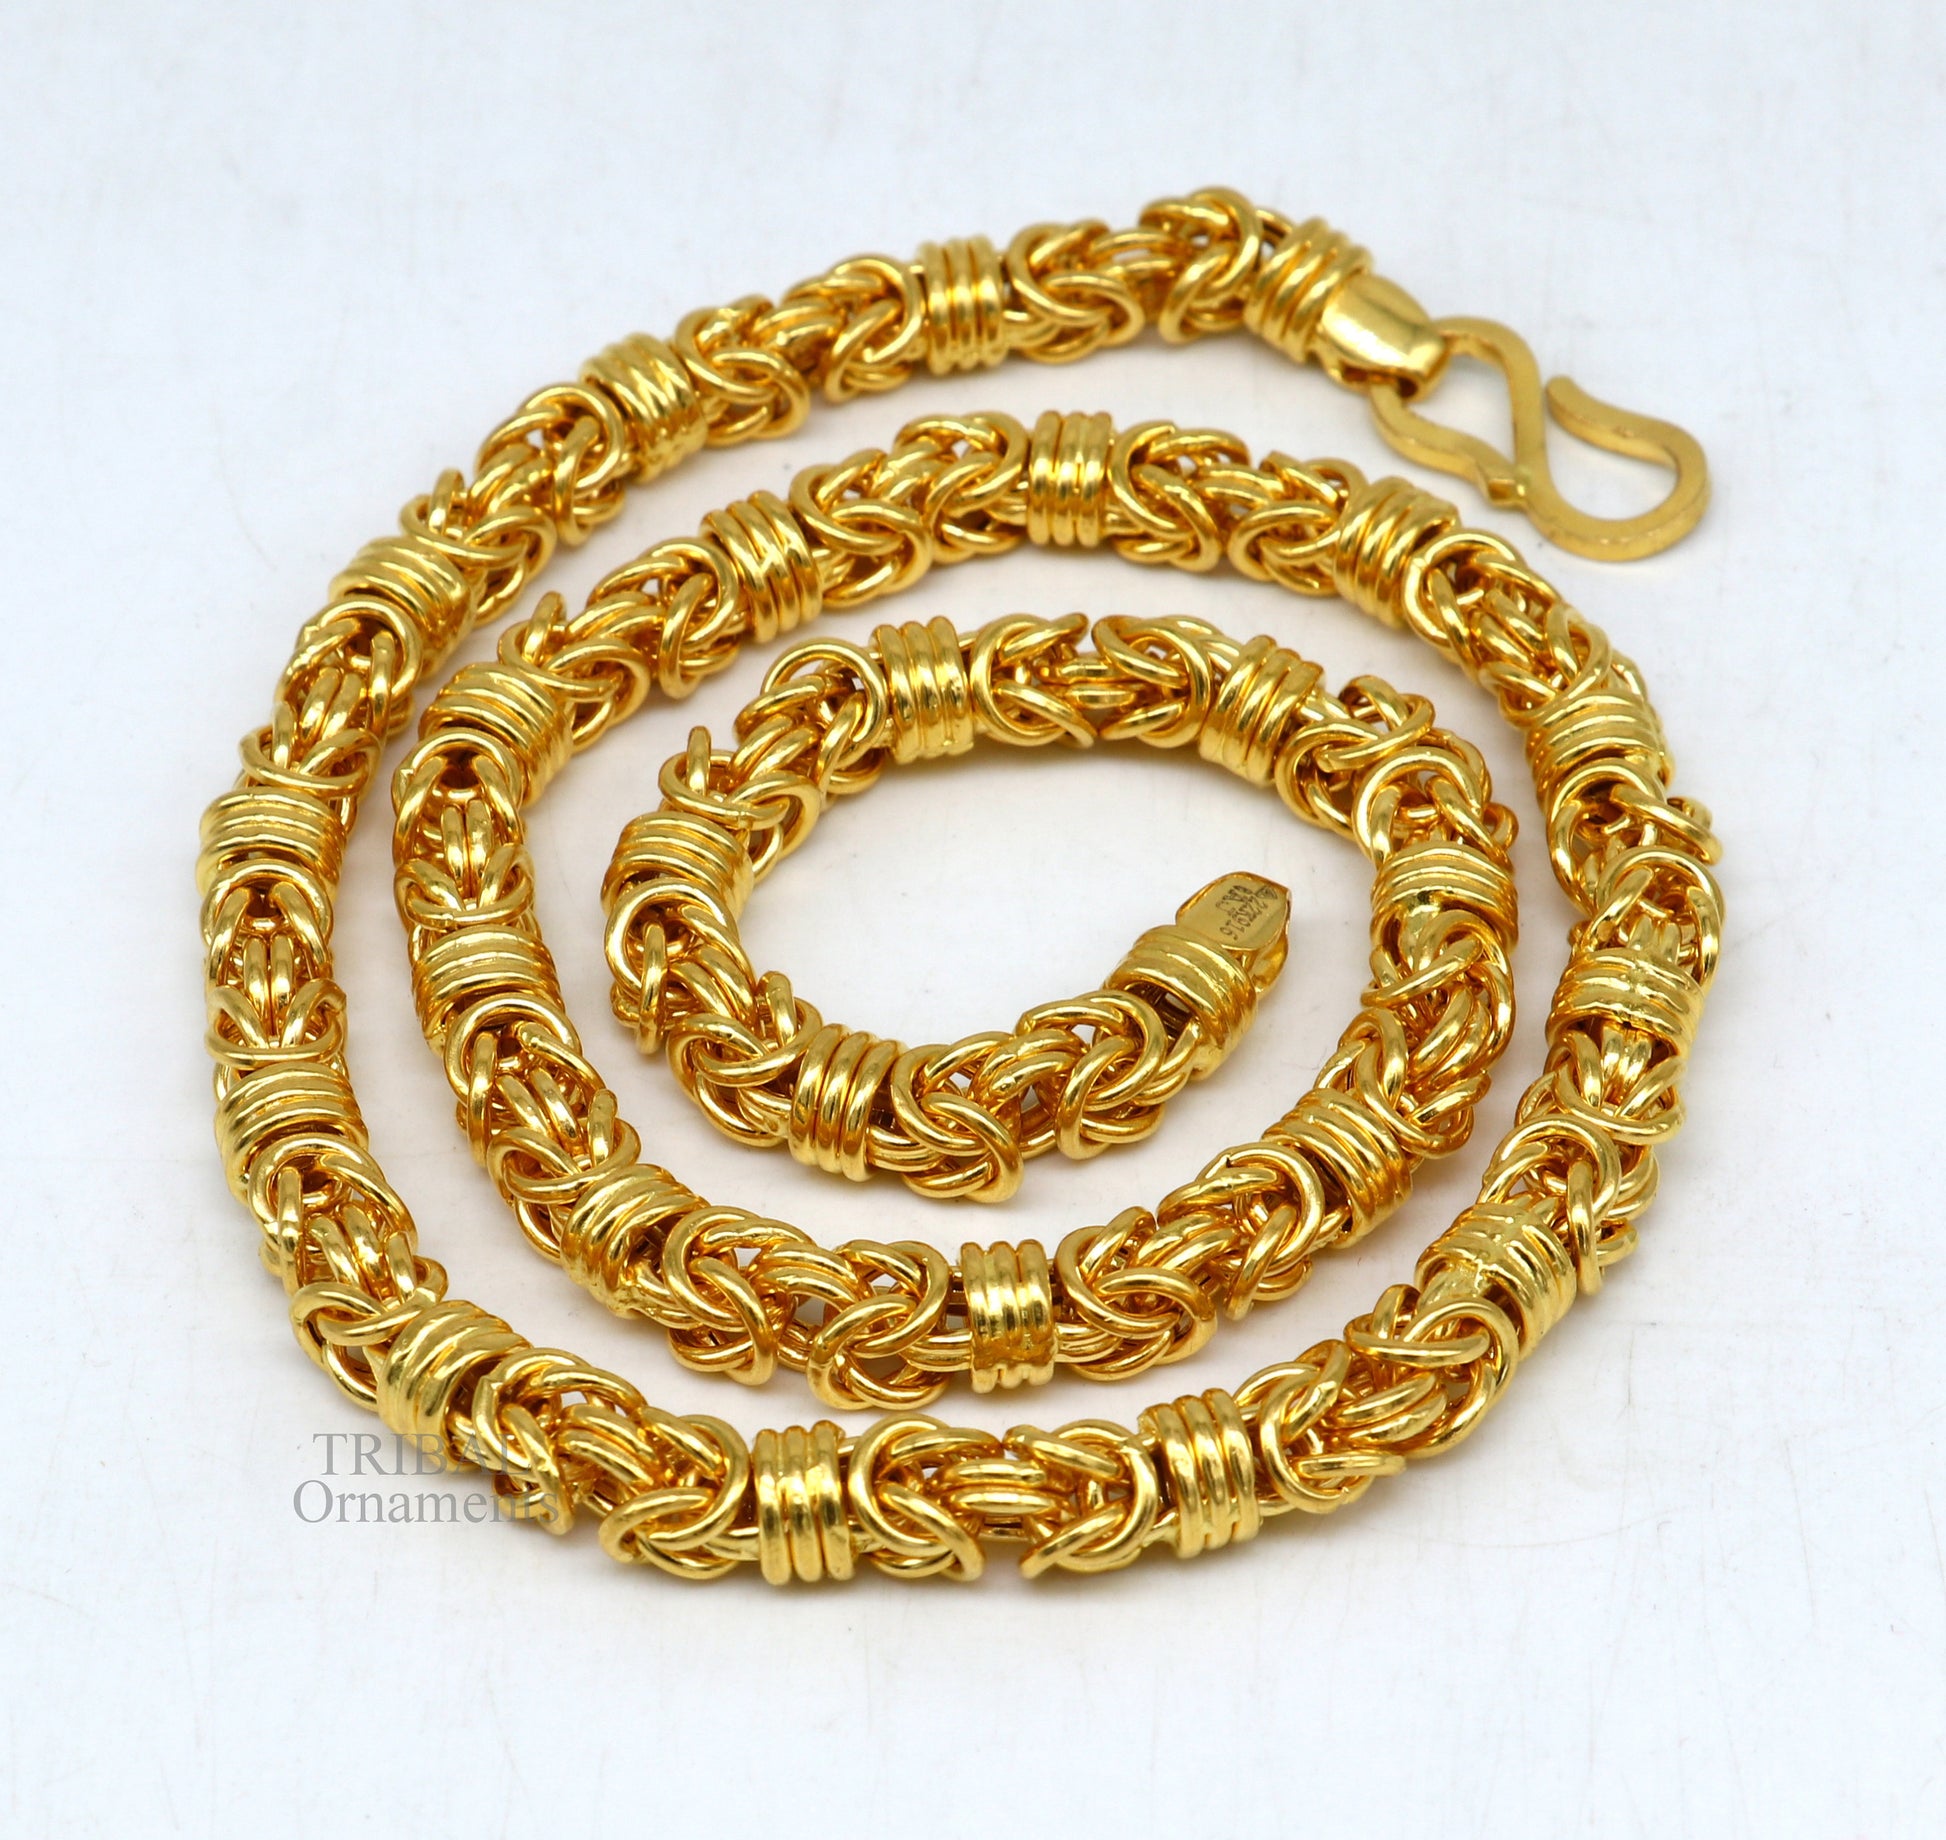 Exclusive 18 kt 30 inches yellow gold handmade fabulous byzantine stylish chain necklace unisex gifting jewelry best gifting wedding ch539 - TRIBAL ORNAMENTS